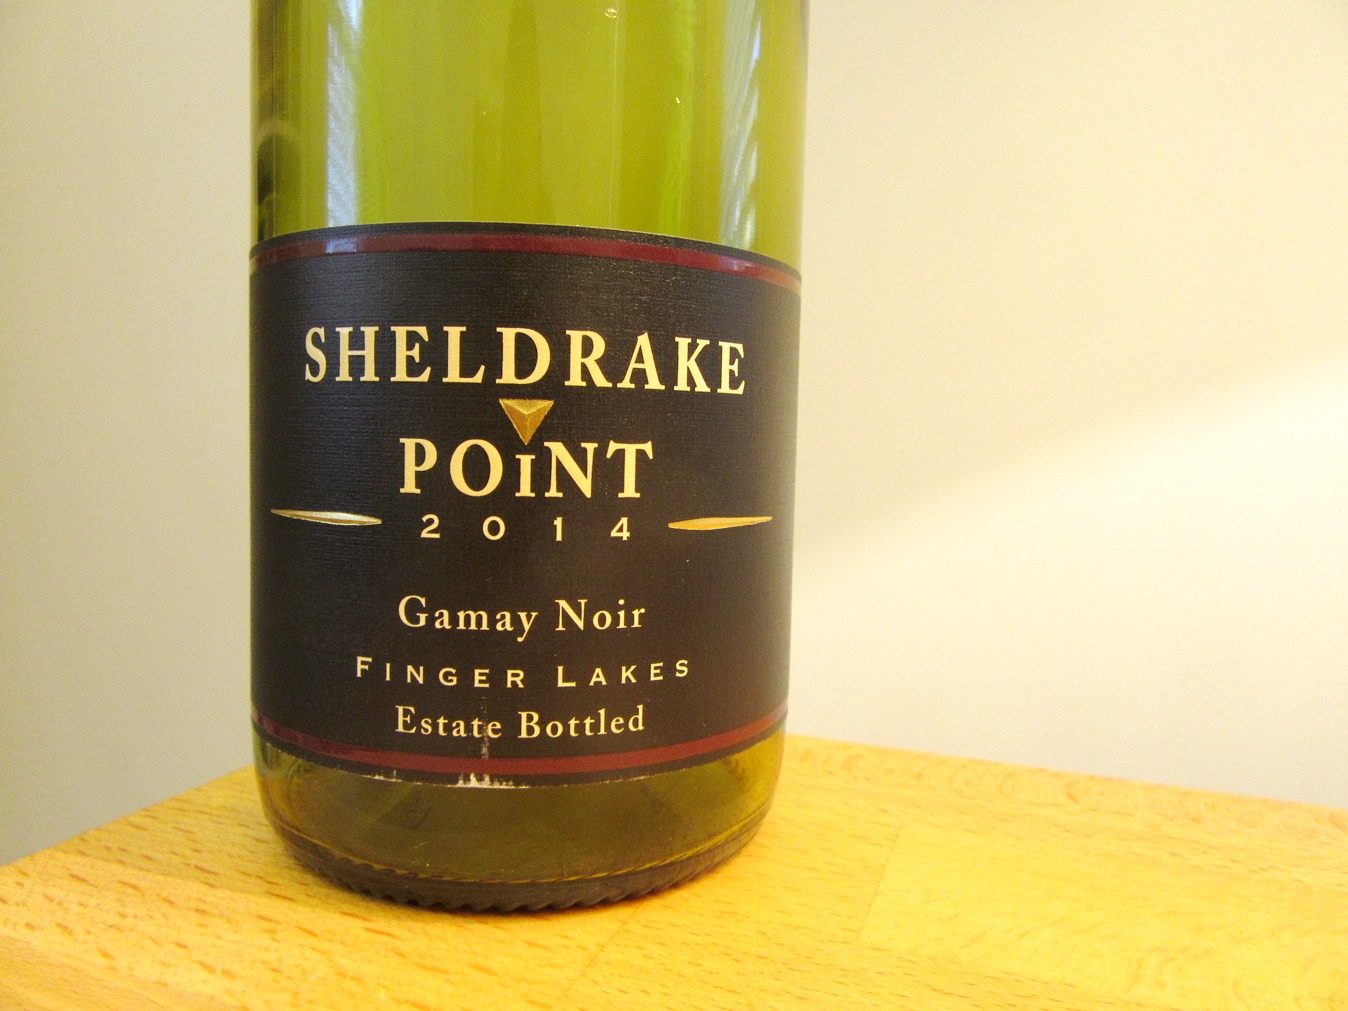 Photo Credit: Wine Casual, Sheldrake Point, Gamay Noir 2014, Finger Lakes, New York